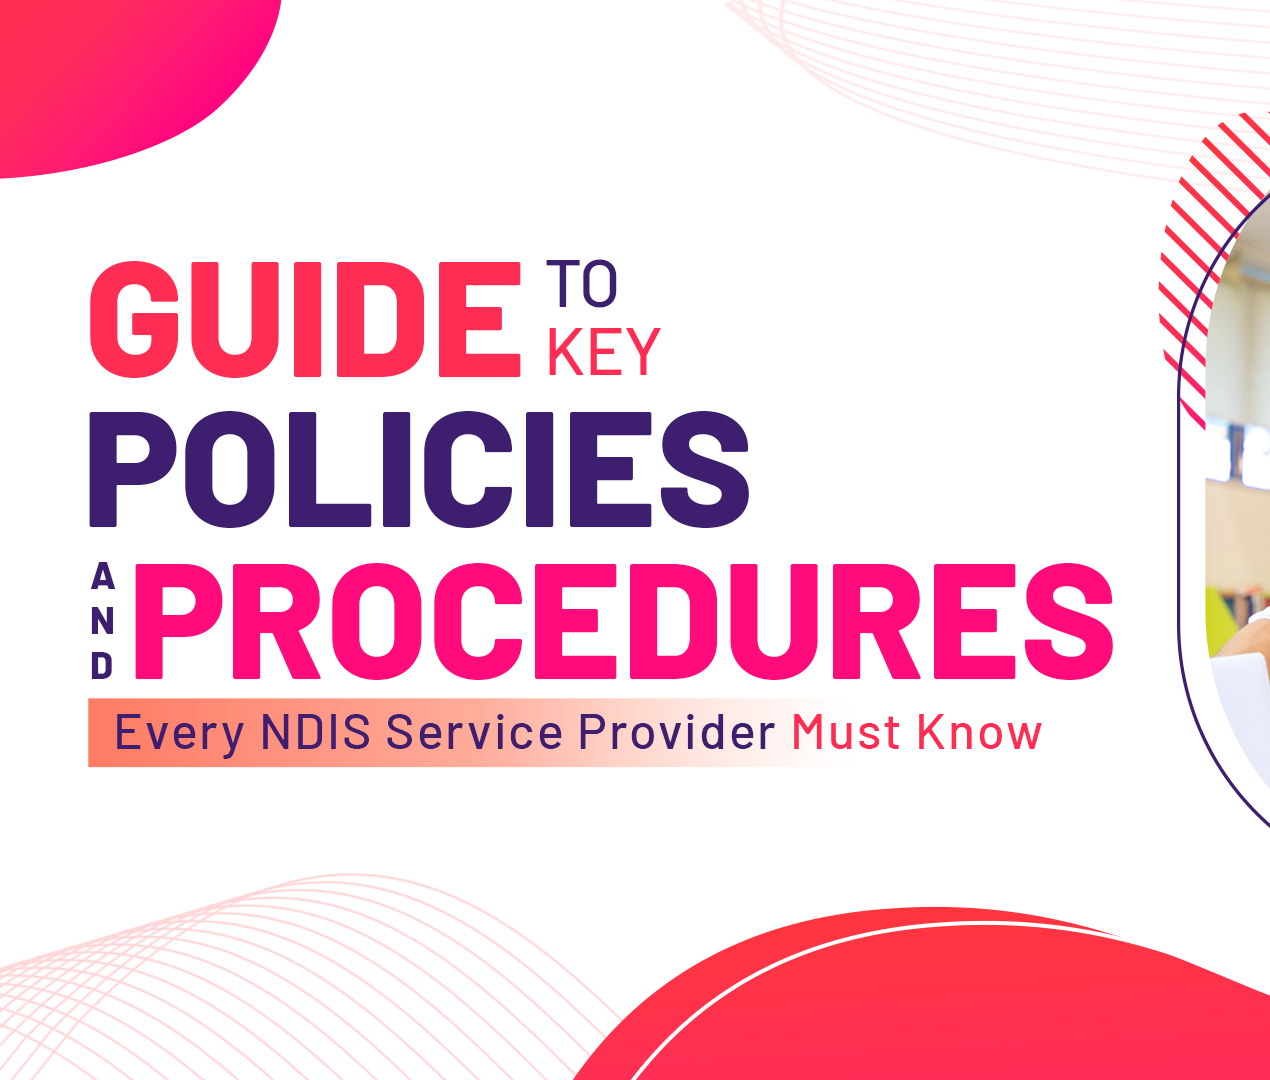 Guide to Key Policies and Procedures Every NDIS Service Provider Must Know